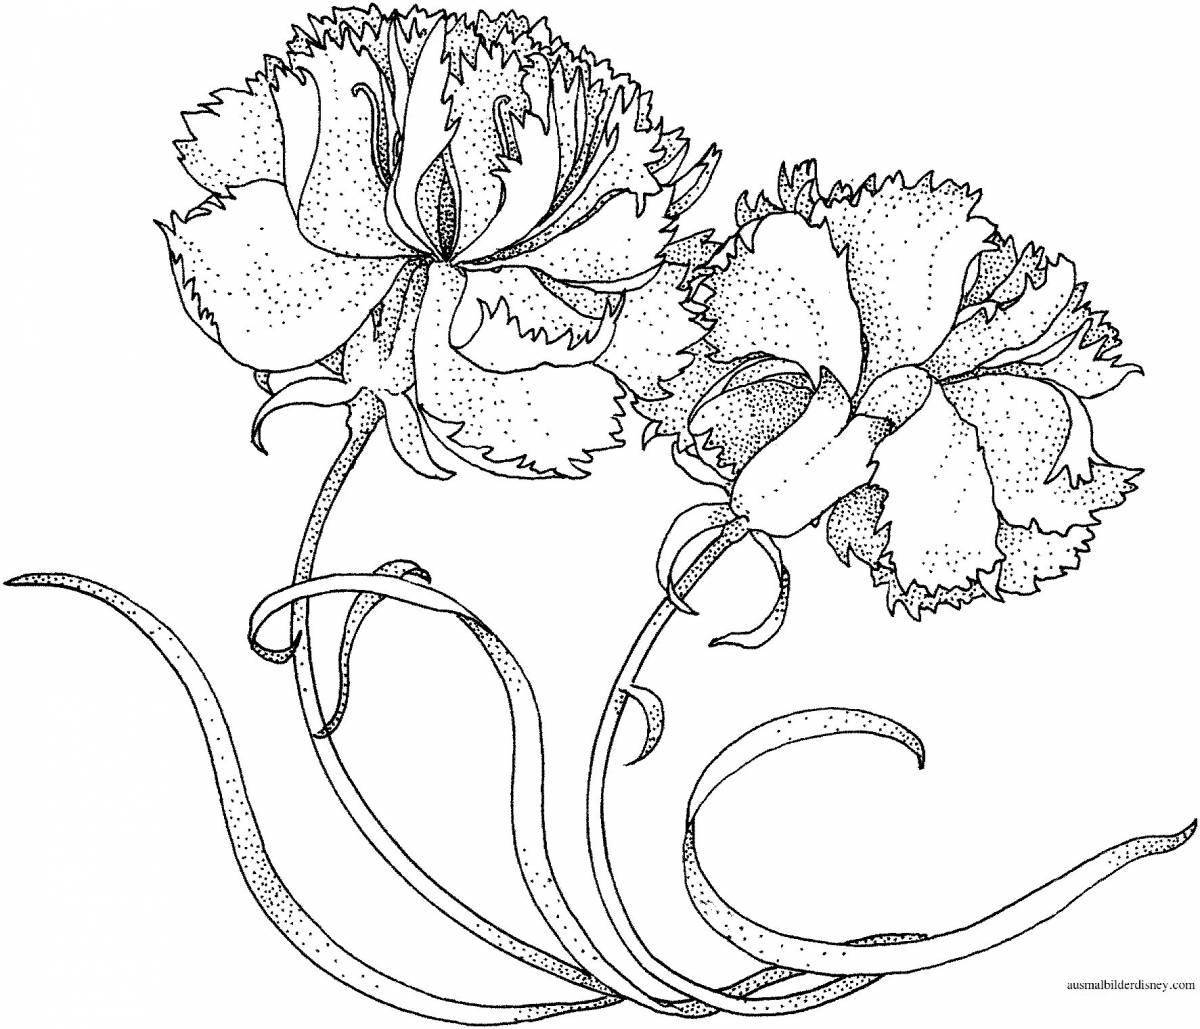 Colorful carnation coloring for May 9th